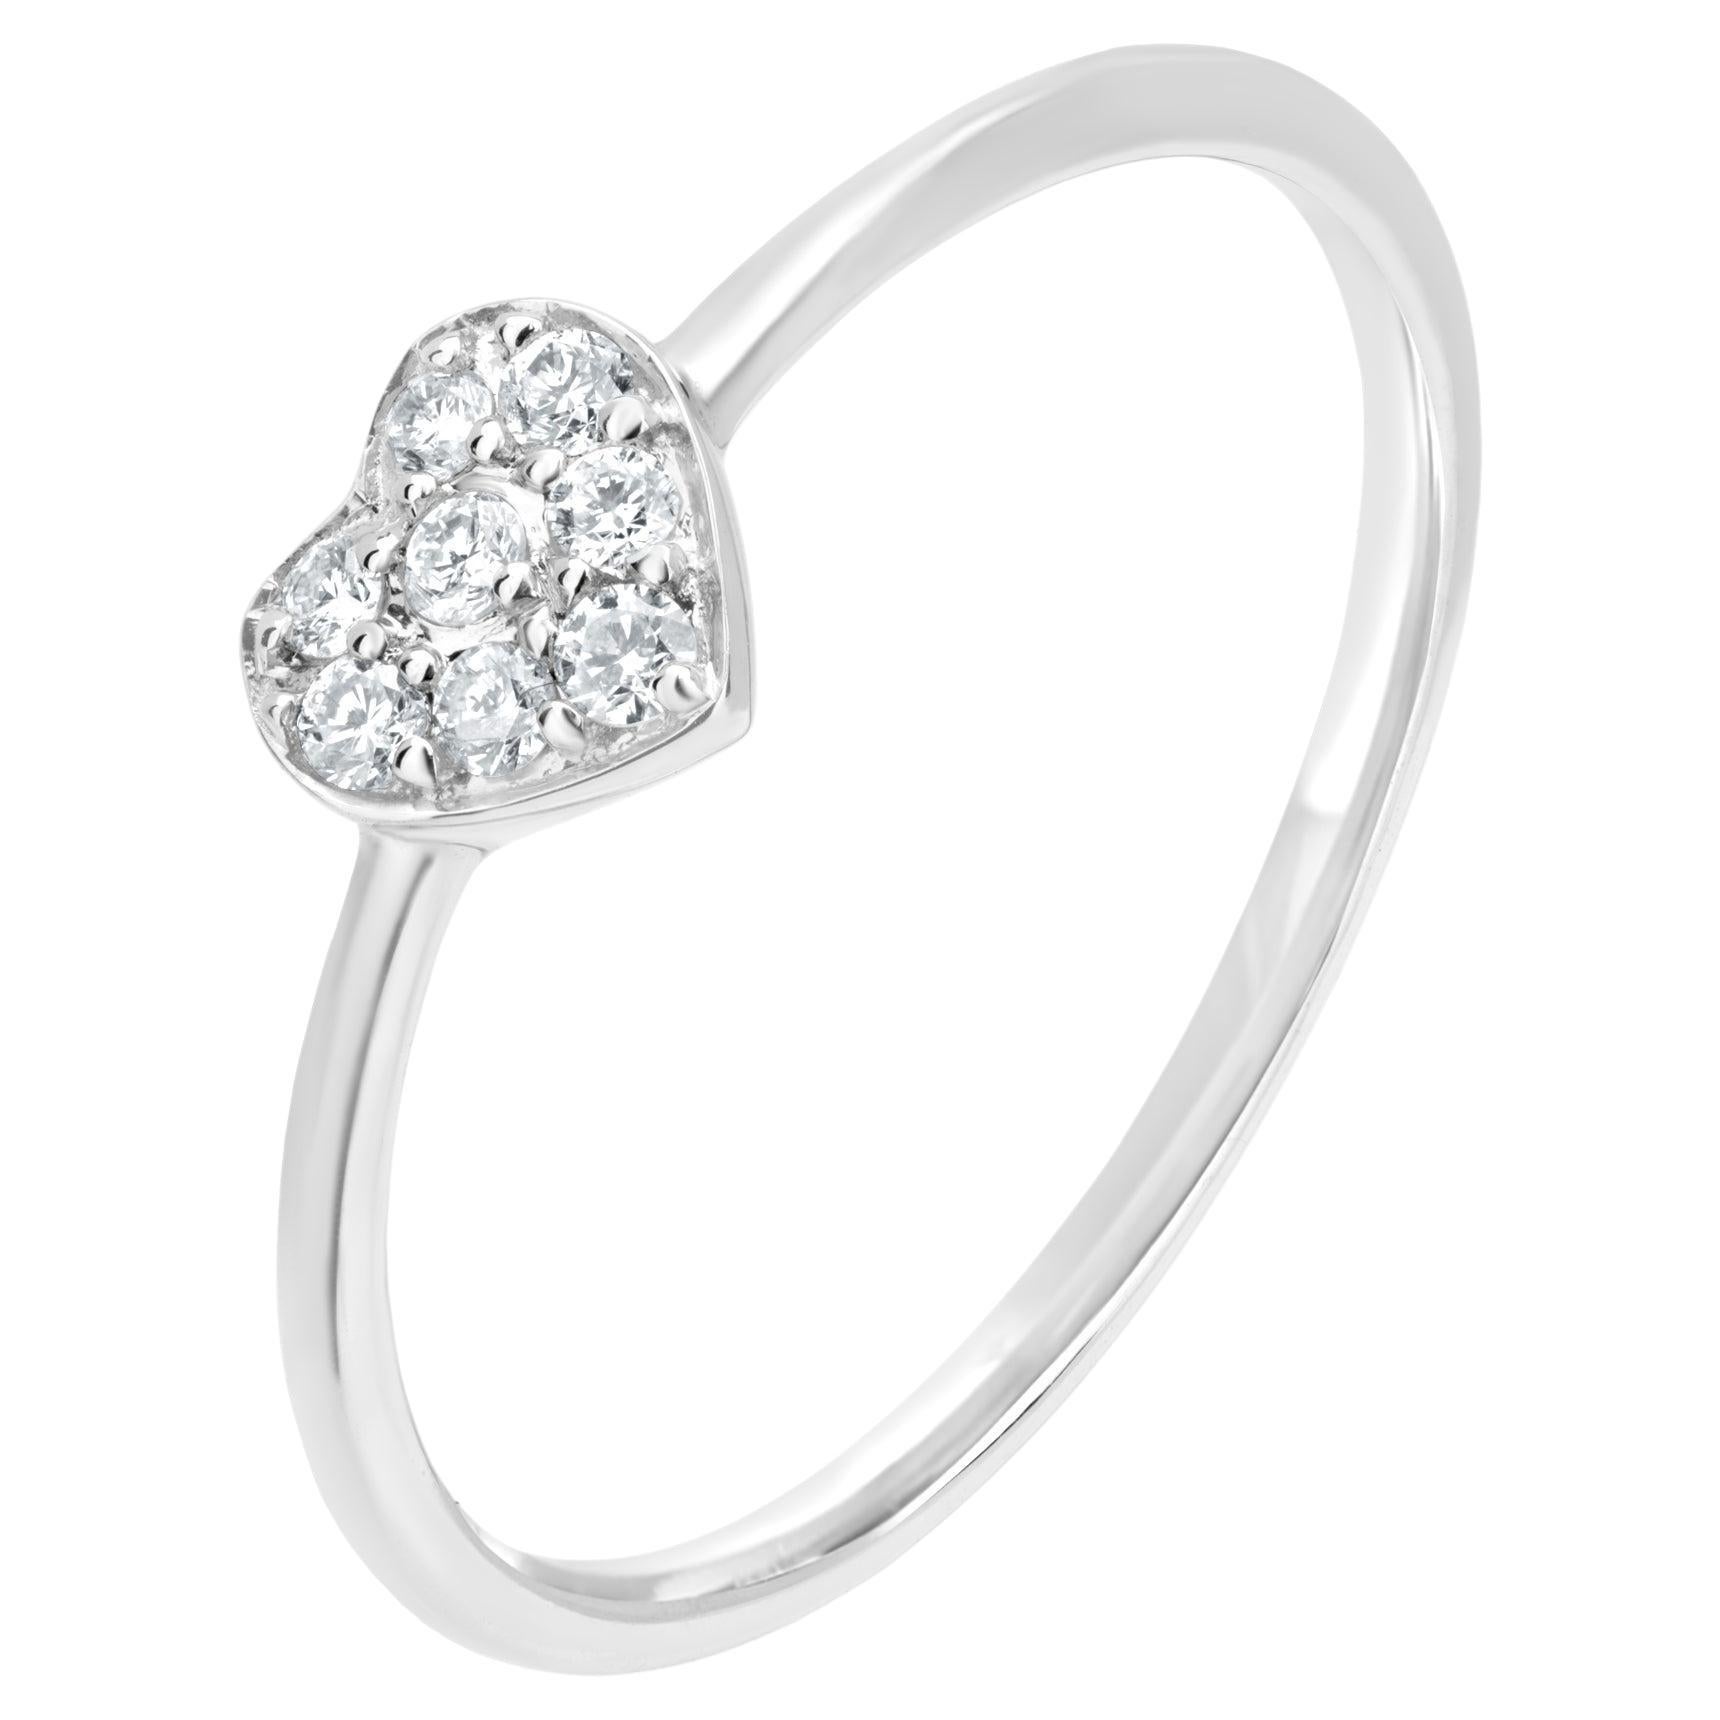 Luxle Round Diamond Heart Shaped Cluster Ring in 18k White Gold